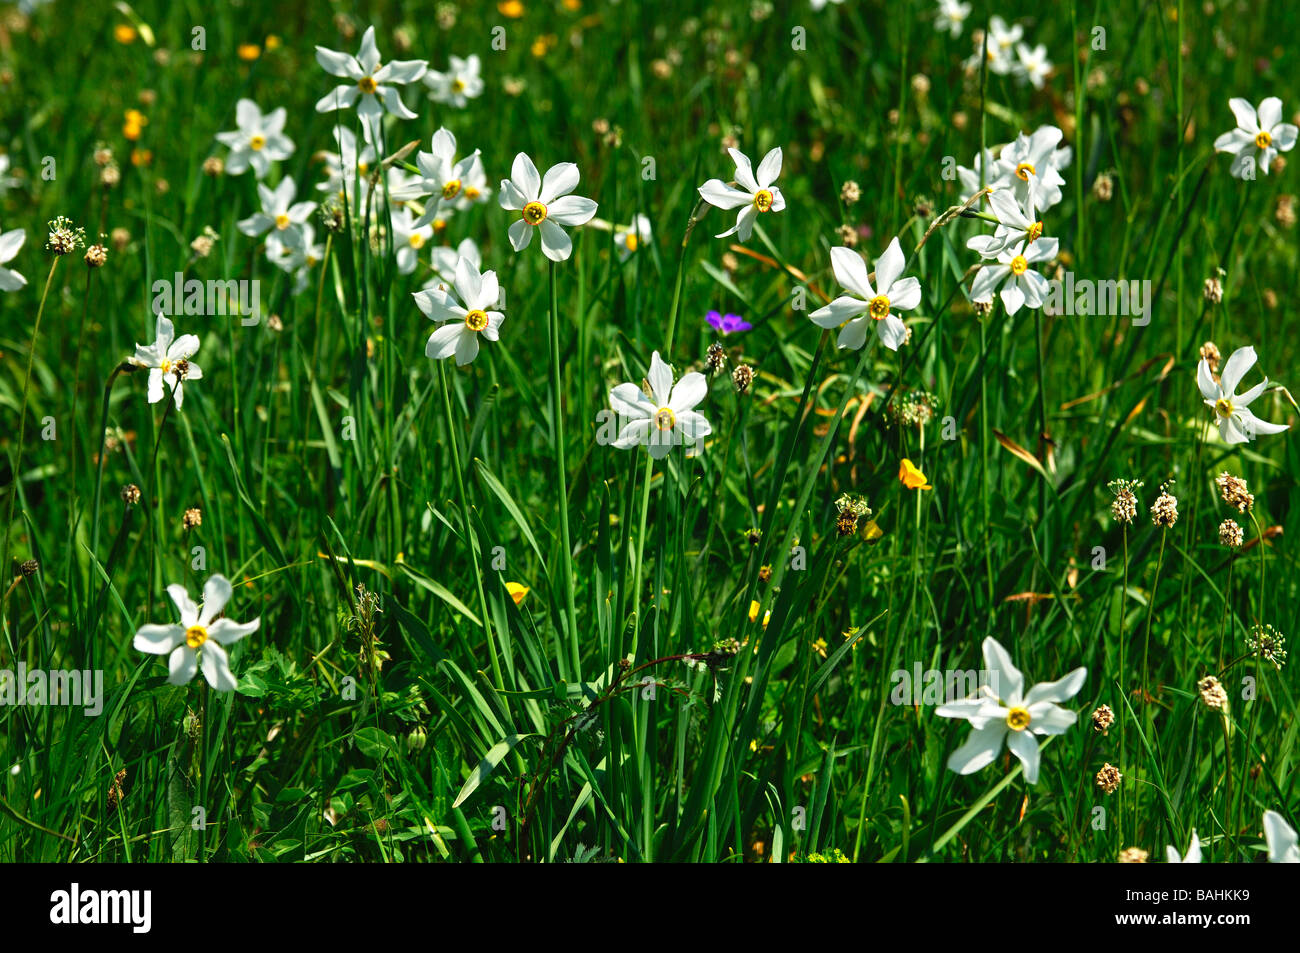 Narcissus, Findern Flower, Poets Daffodil, Narcissus poeticus, Les Avants near Montreux, Vaud, Switzerland Stock Photo